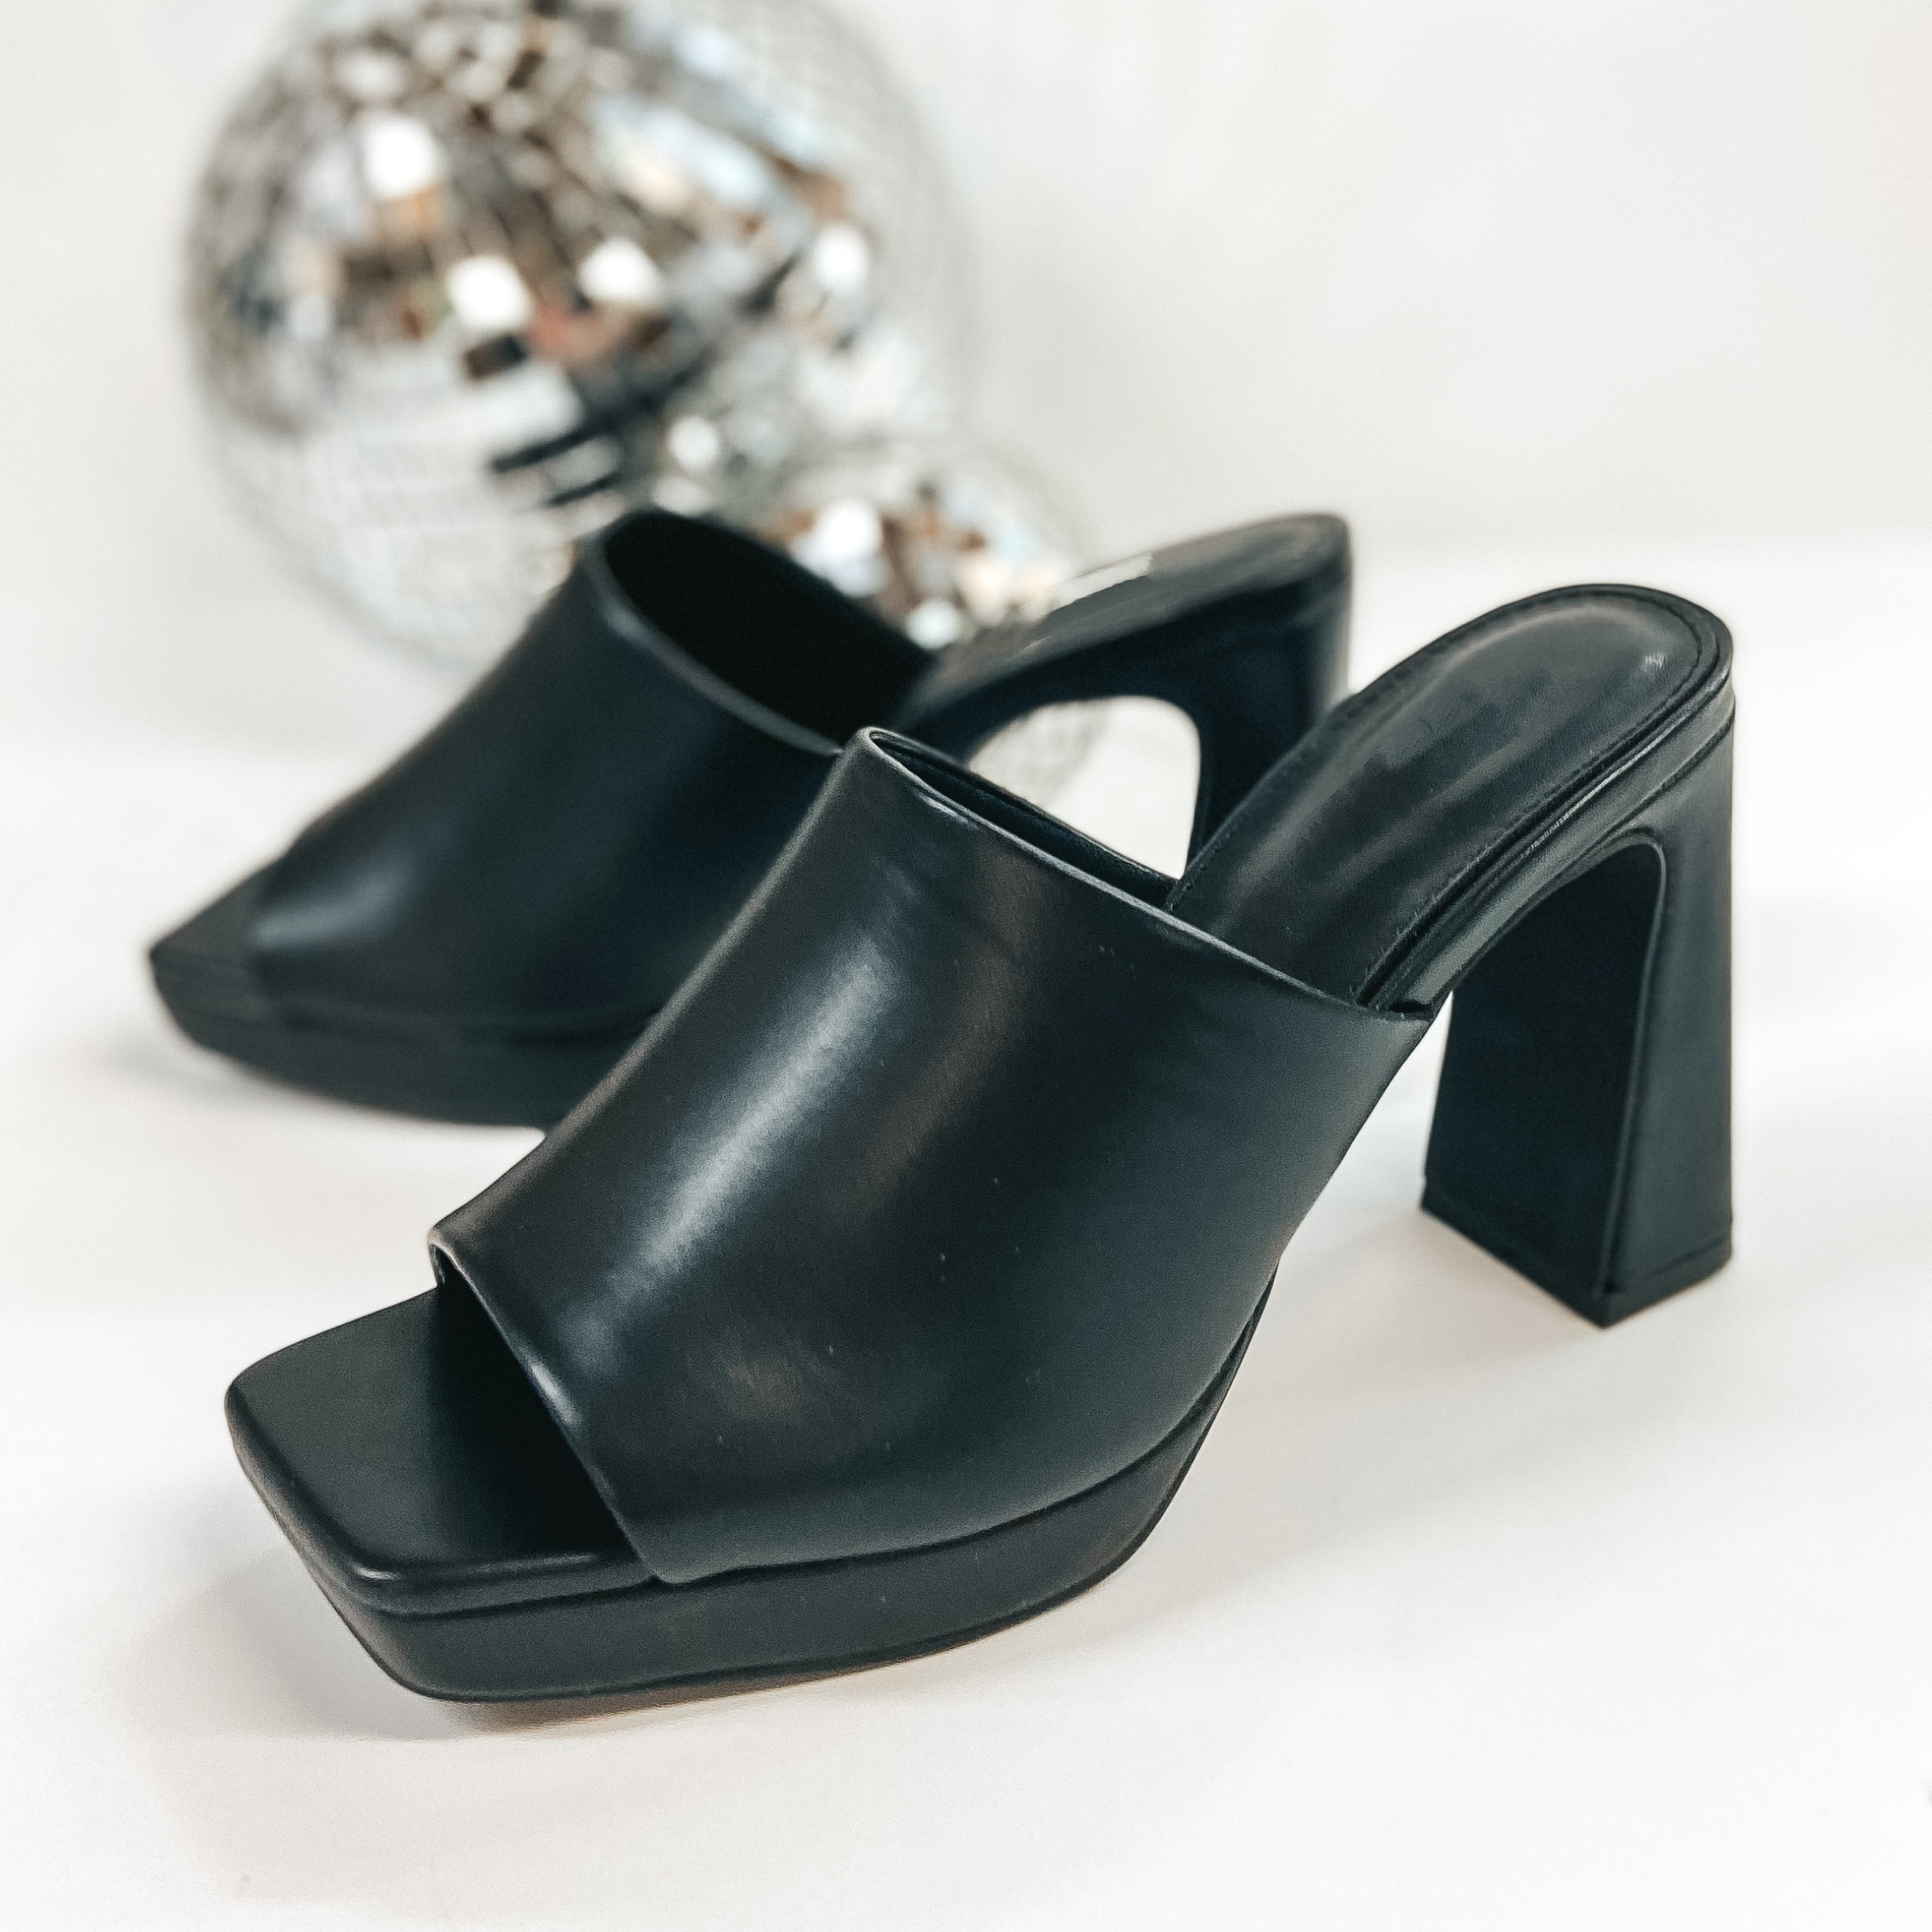 A pair of platform shoes with a slip on upper and open toe. These shoes have a high block heel. The black heels are pictured on white background with disco balls.